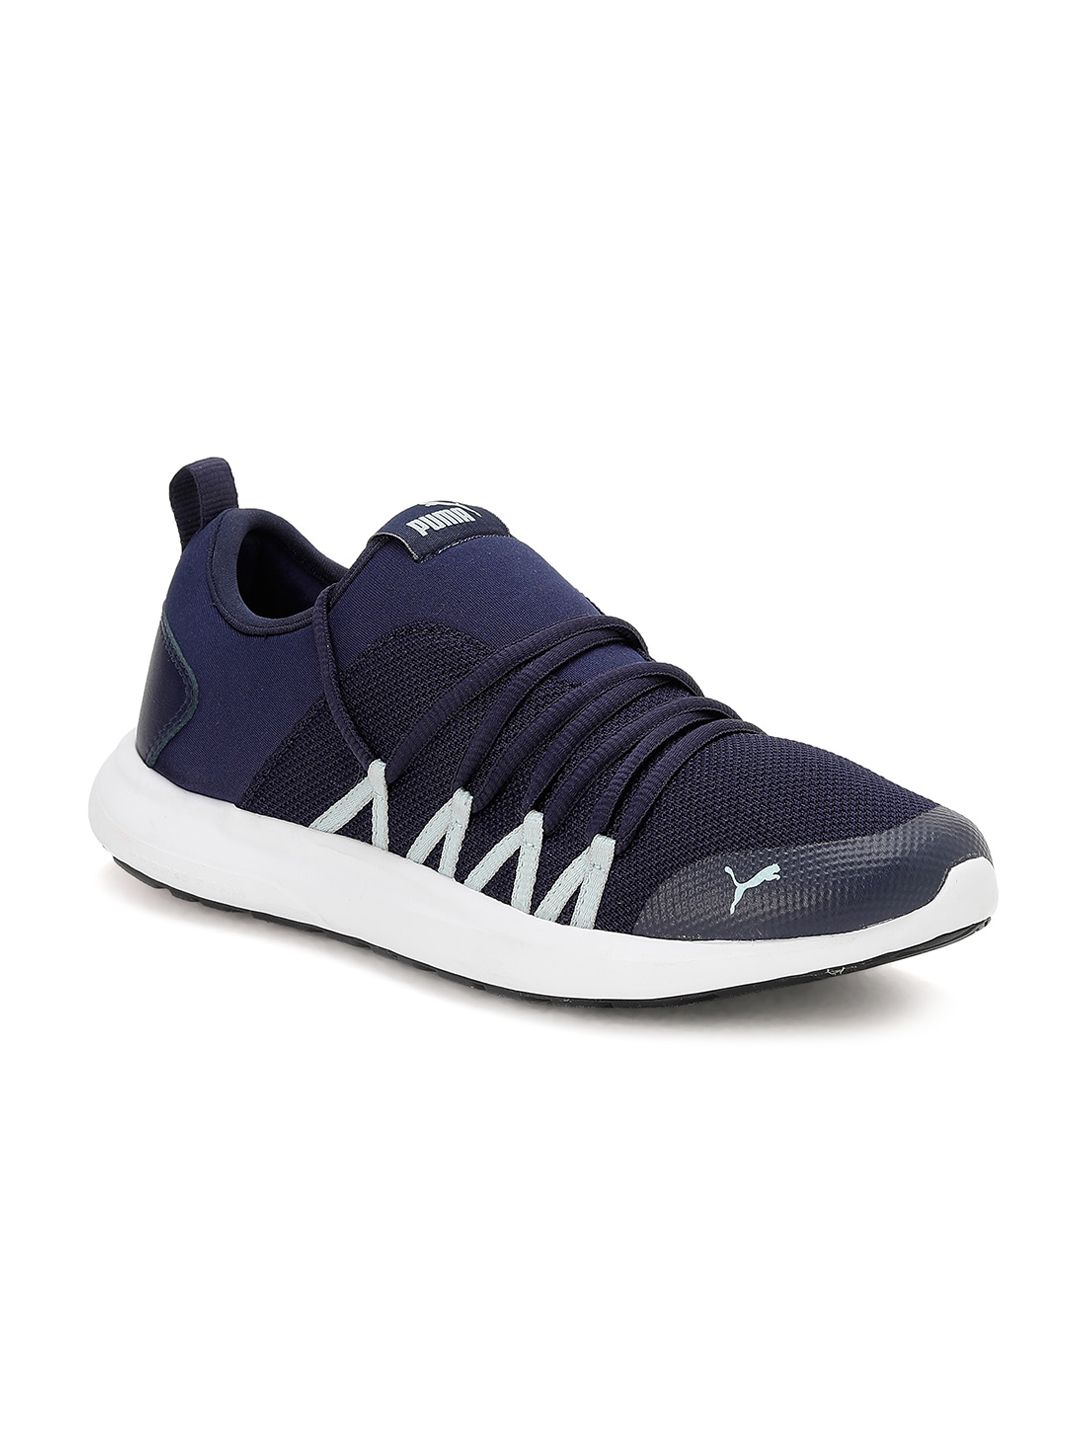 Puma Women Navy Blue Woven Design Slip-On Sneakers Price in India